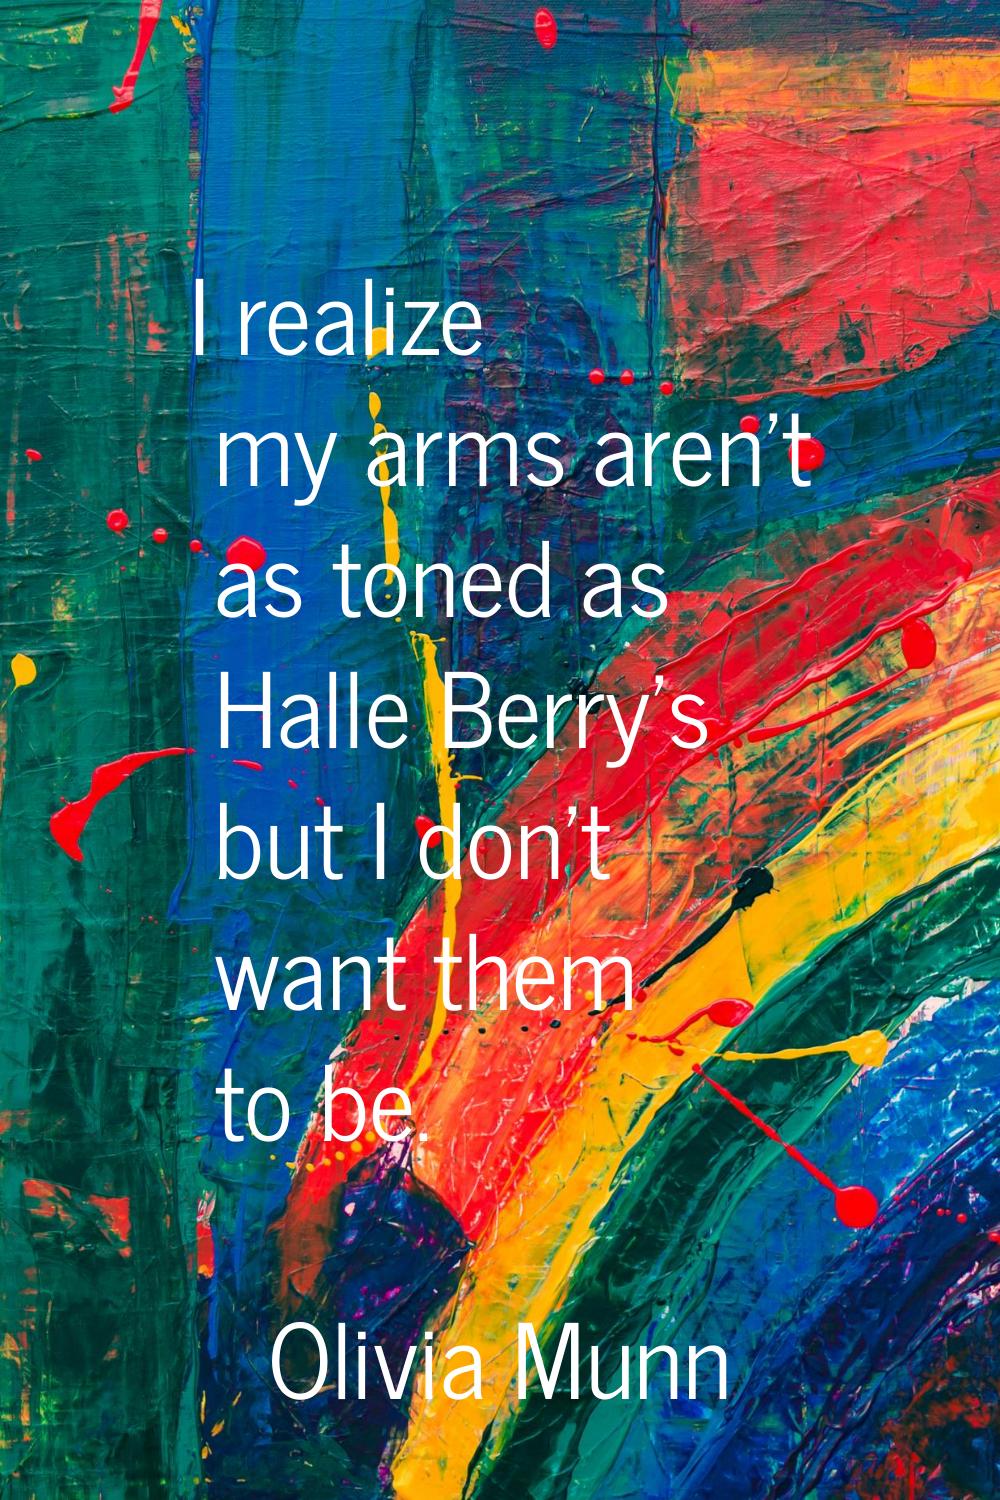 I realize my arms aren't as toned as Halle Berry's but I don't want them to be.